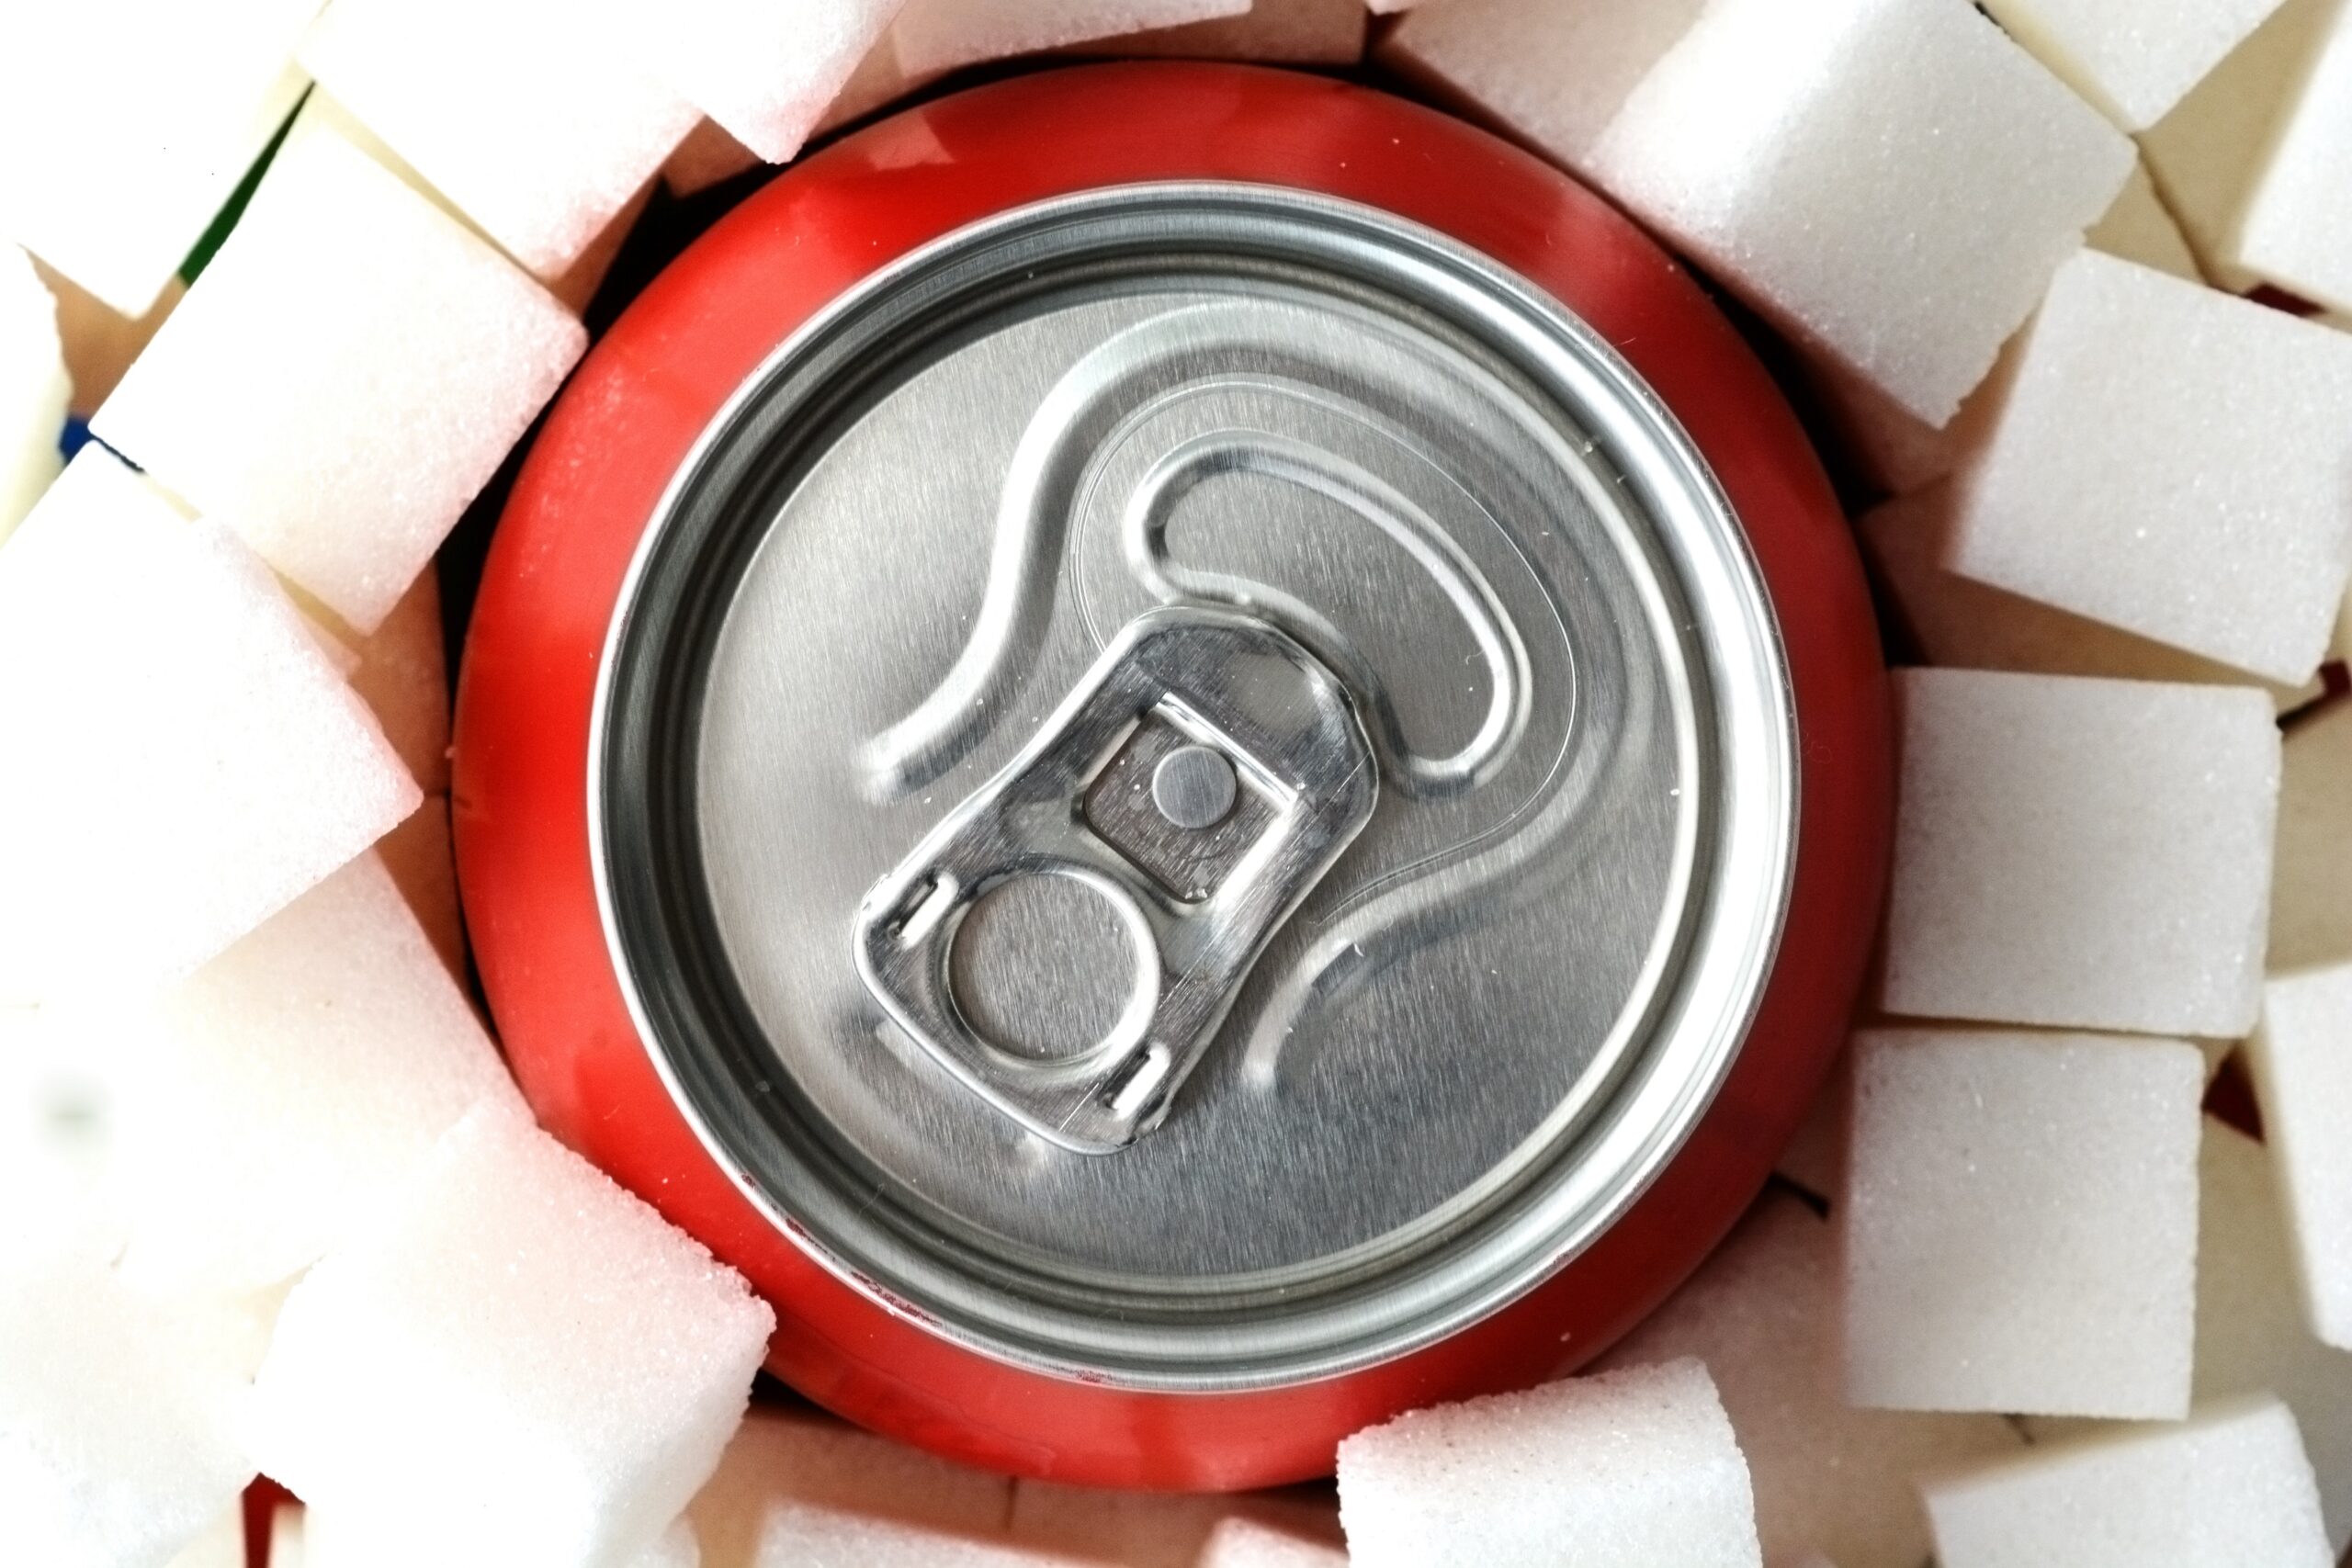 Sugar tax can reduce the risk of illness and save billions of euros